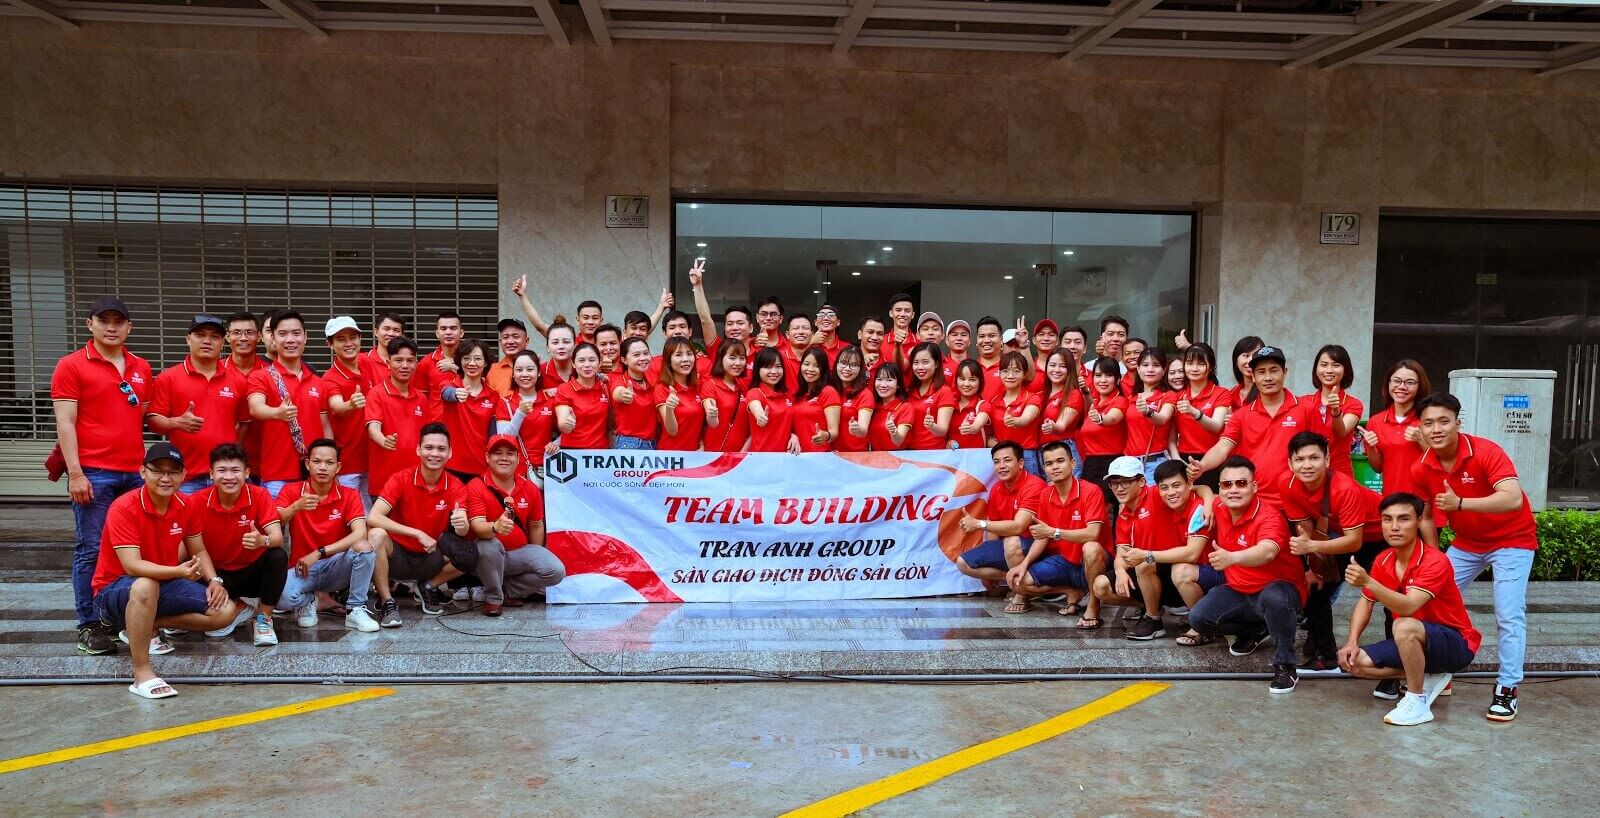 Teambuilding Trần Anh Group - 1